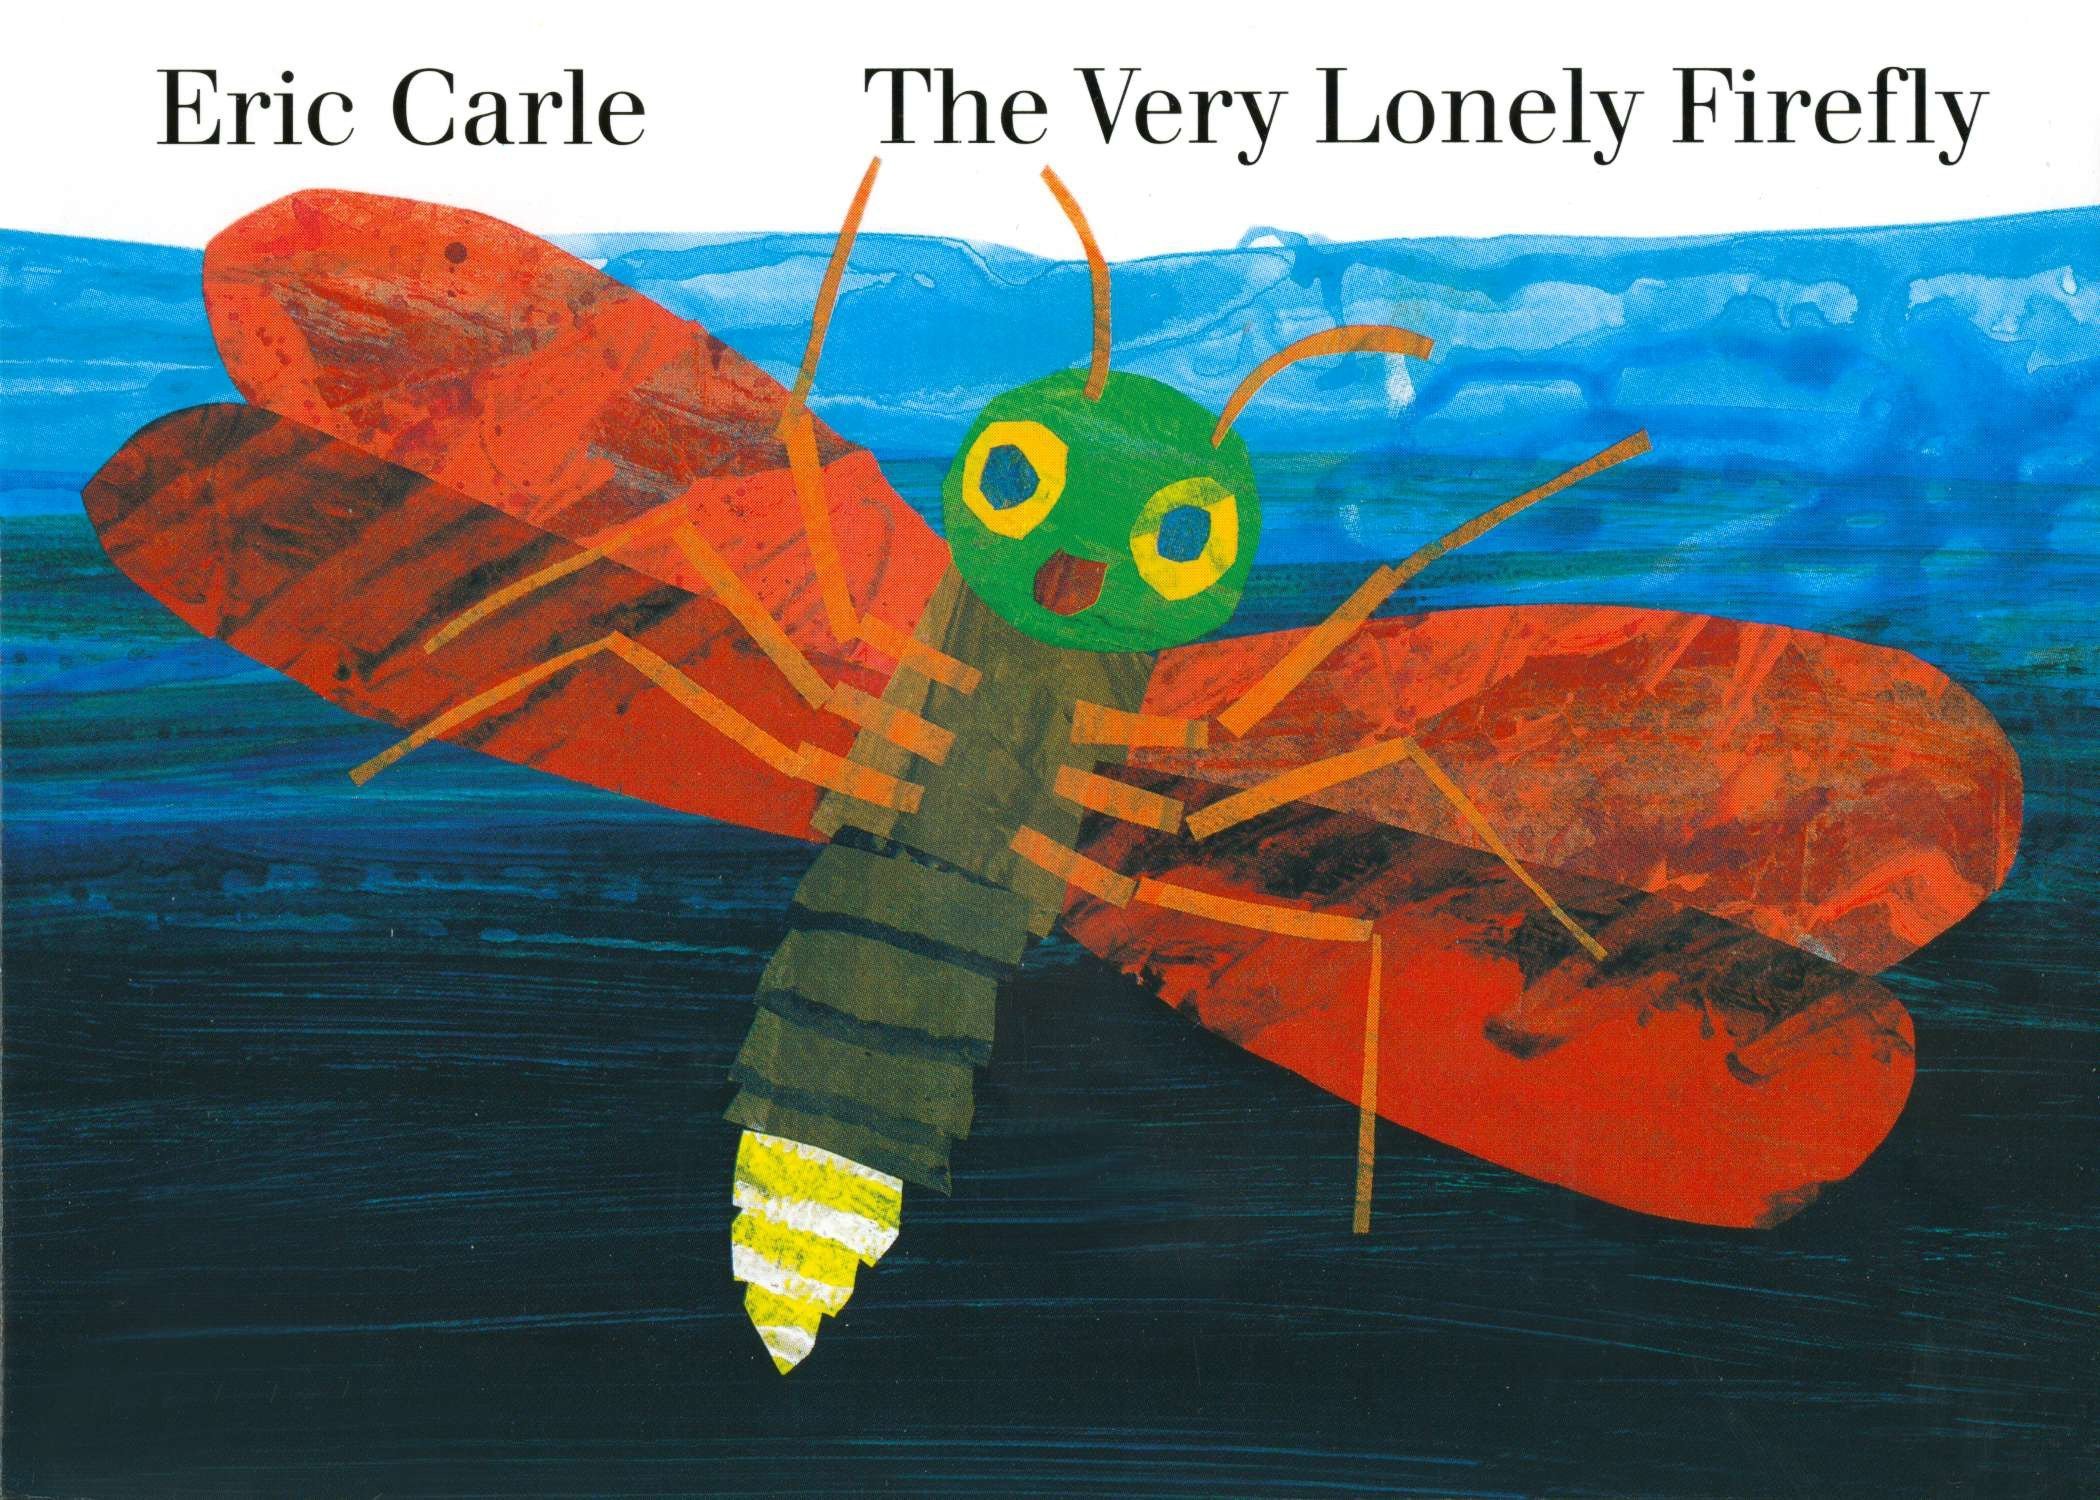 using The Very Lonely Firefly in speech therapy